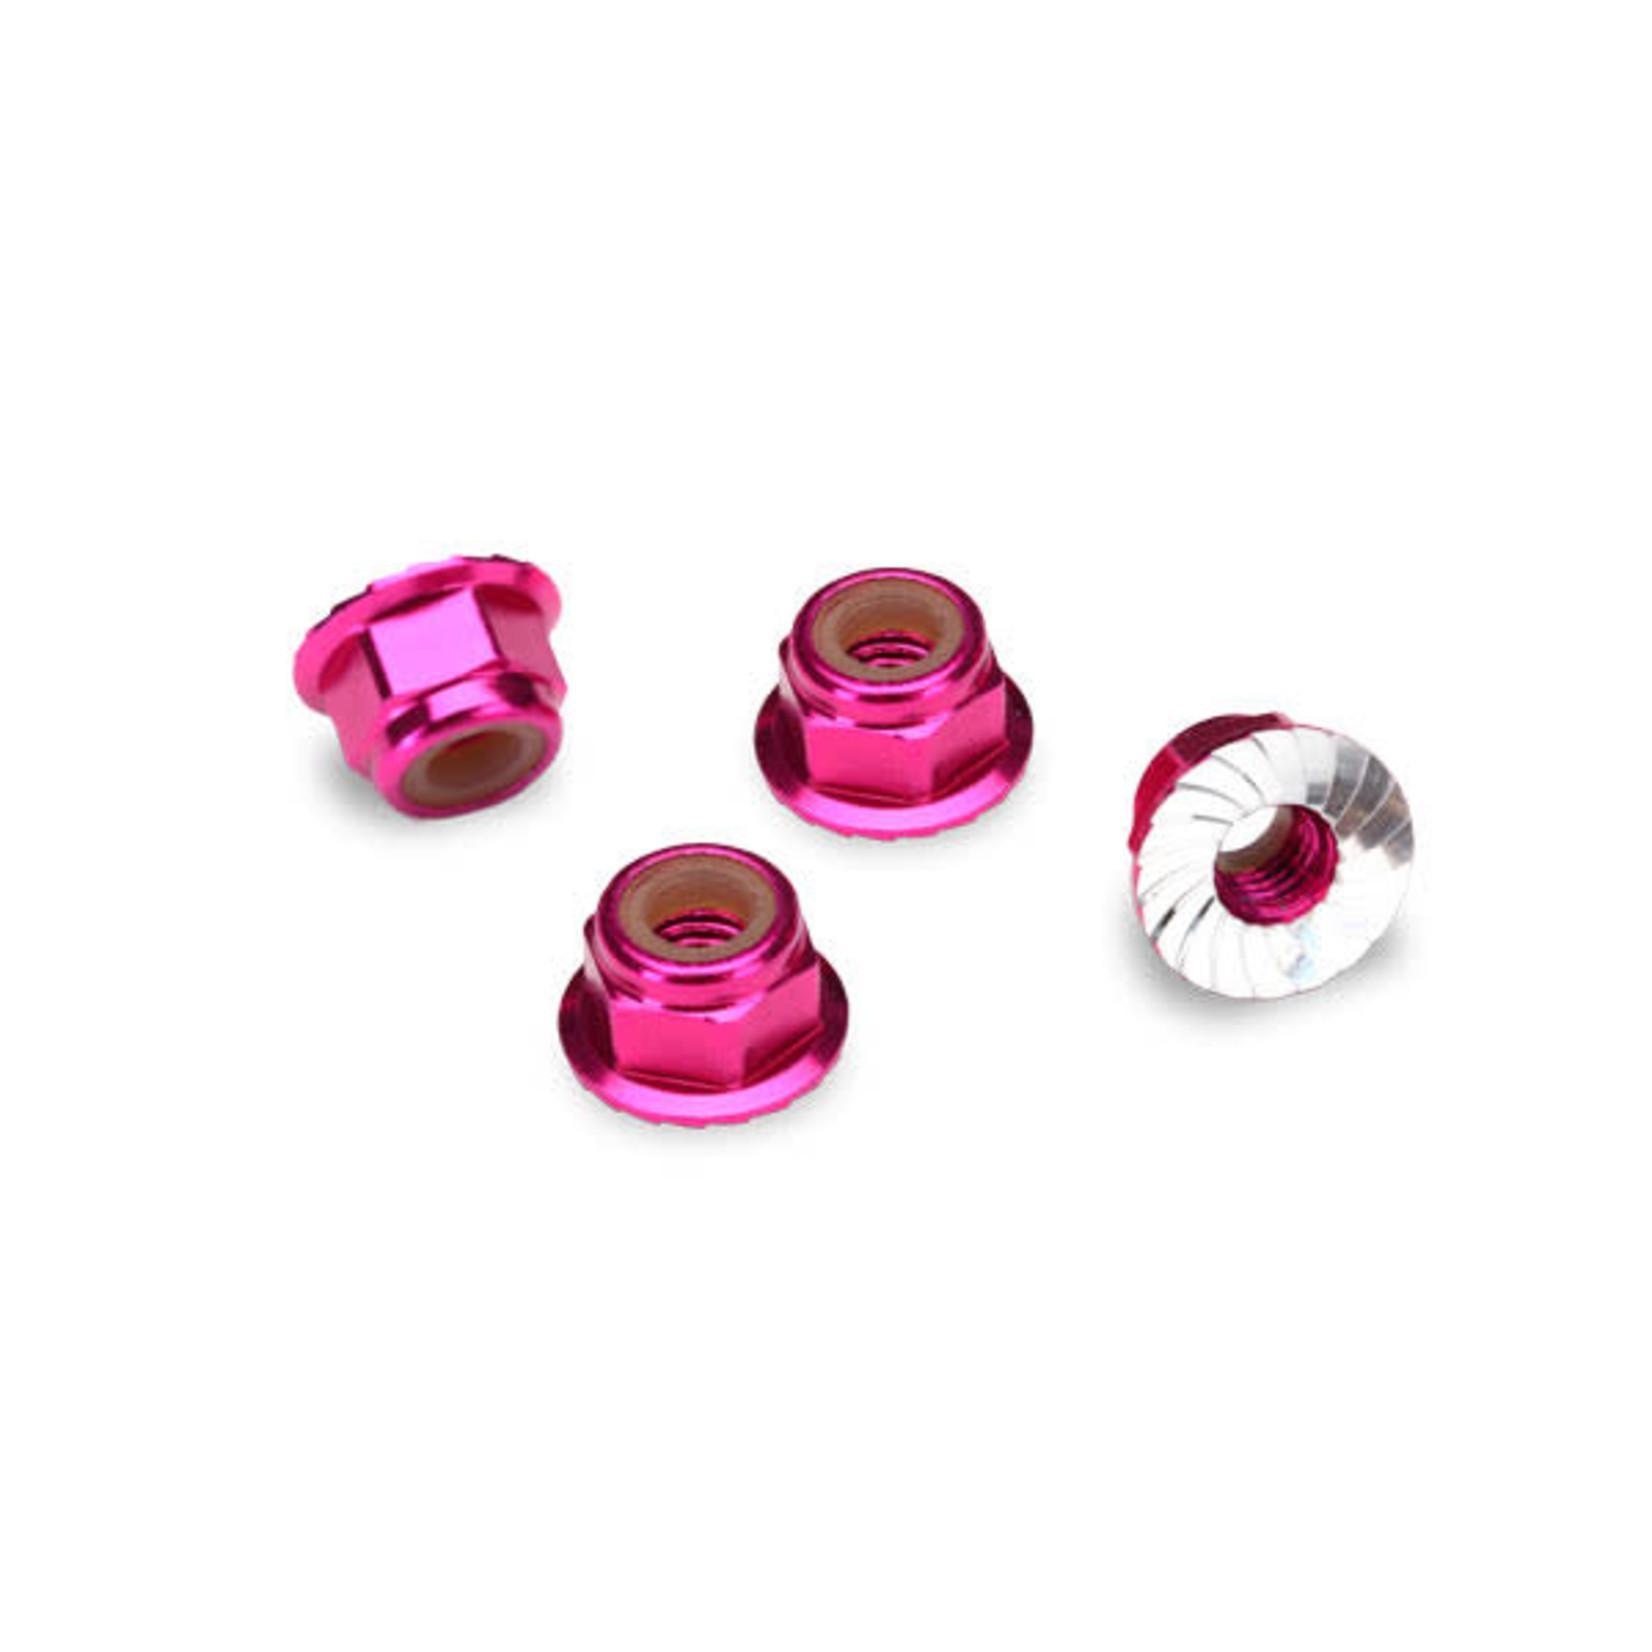 Traxxas TRA1747P Traxxas Nuts 4mm Flanged Lock Pink